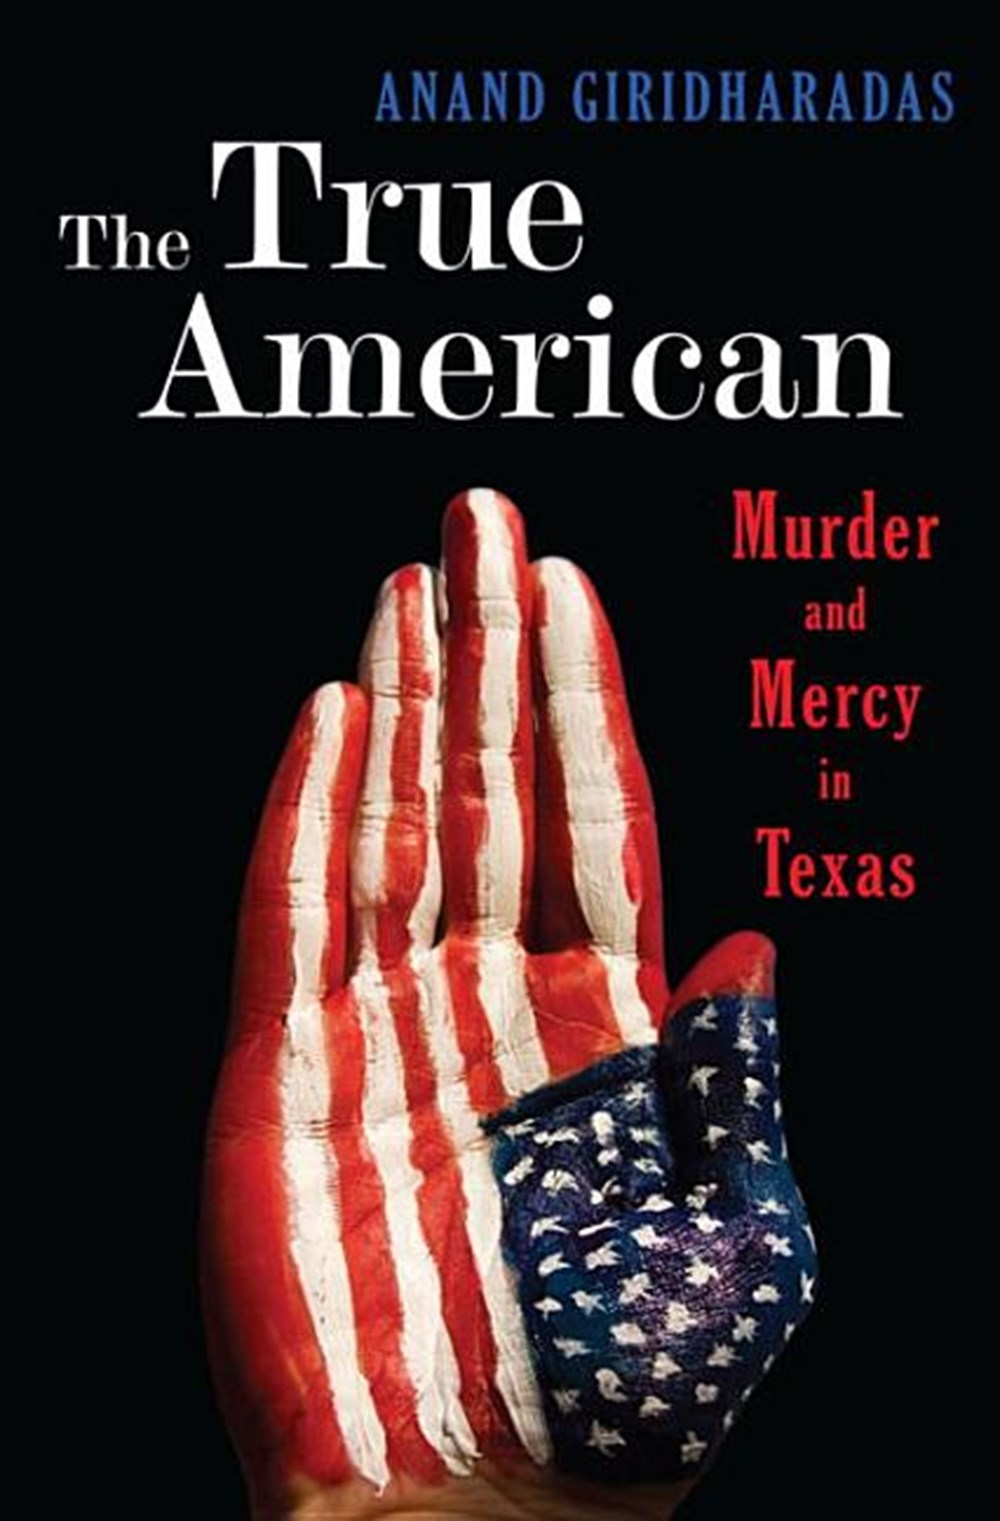 True American Murder and Mercy in Texas